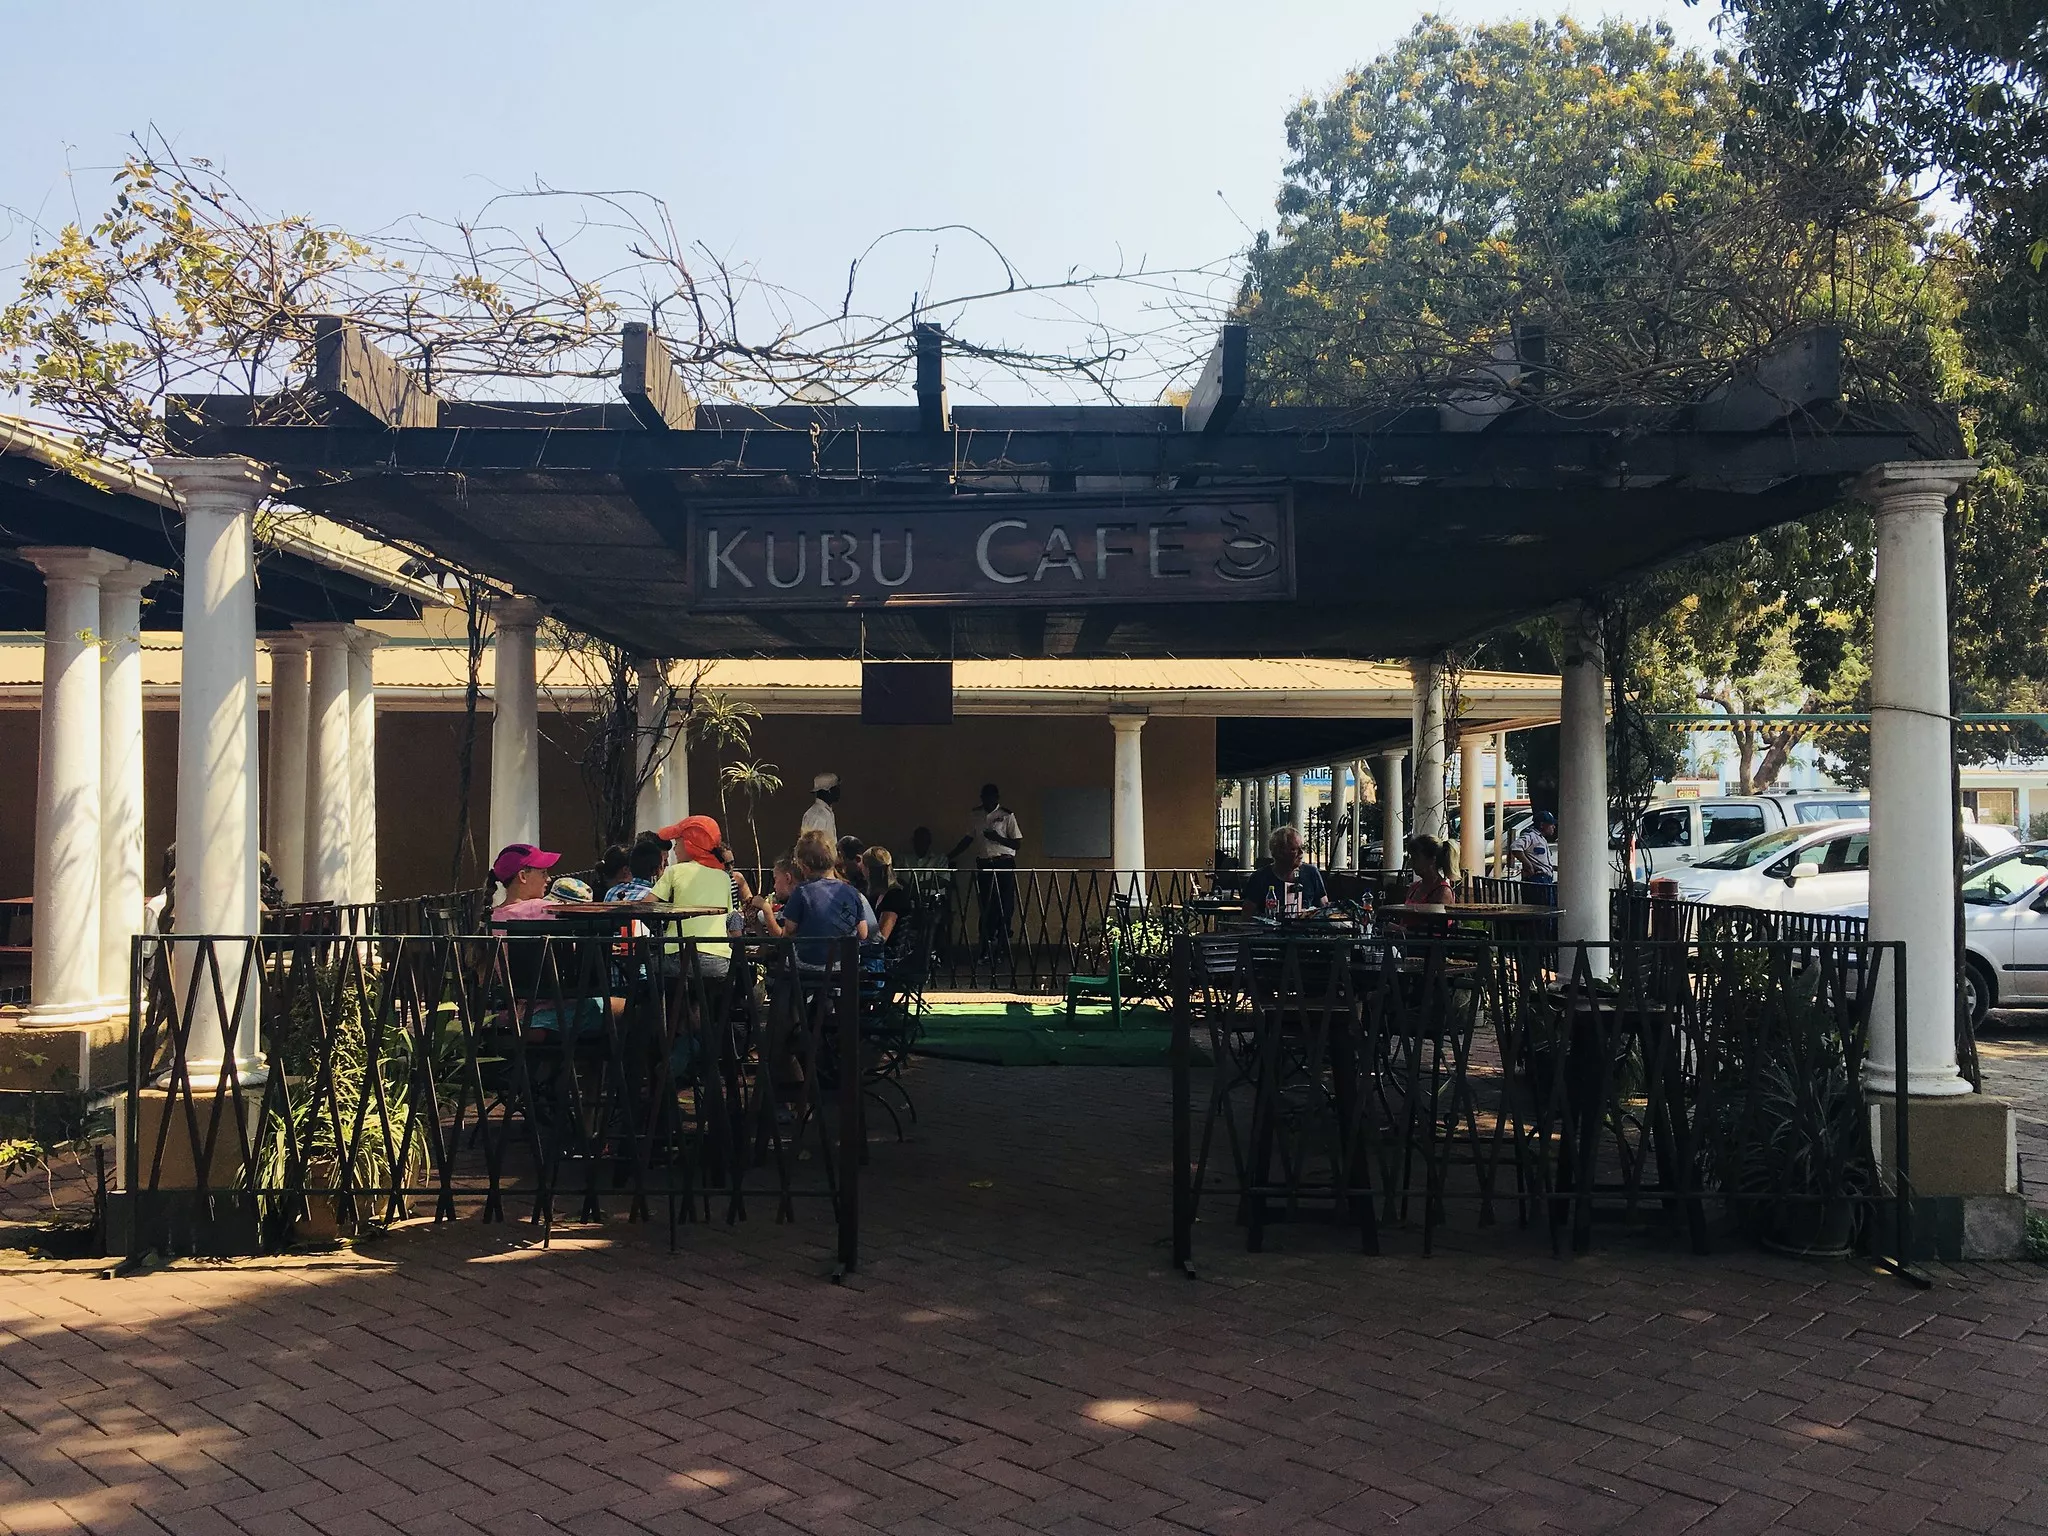 Kubu Cafe in Zambia, Africa | Cafes - Rated 3.6